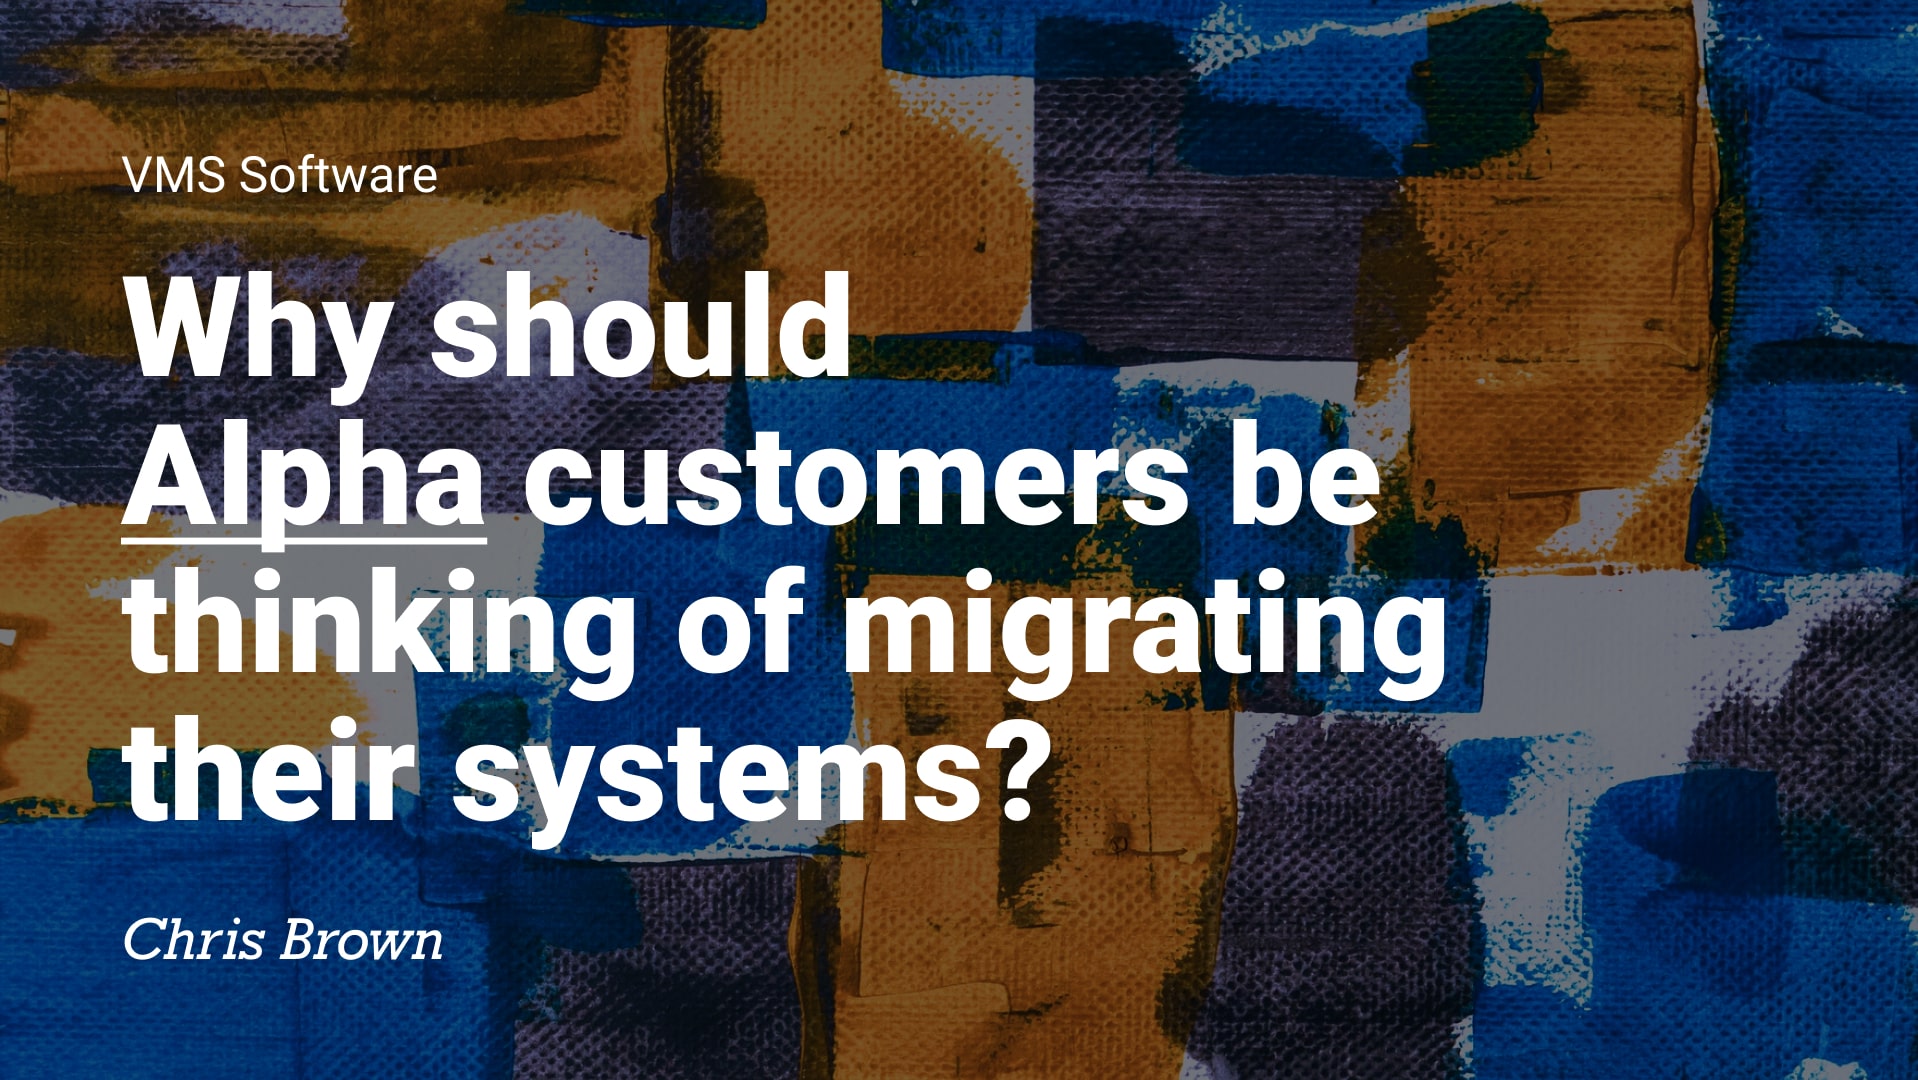 Why should Alpha customers be thinking of migrating their systems?